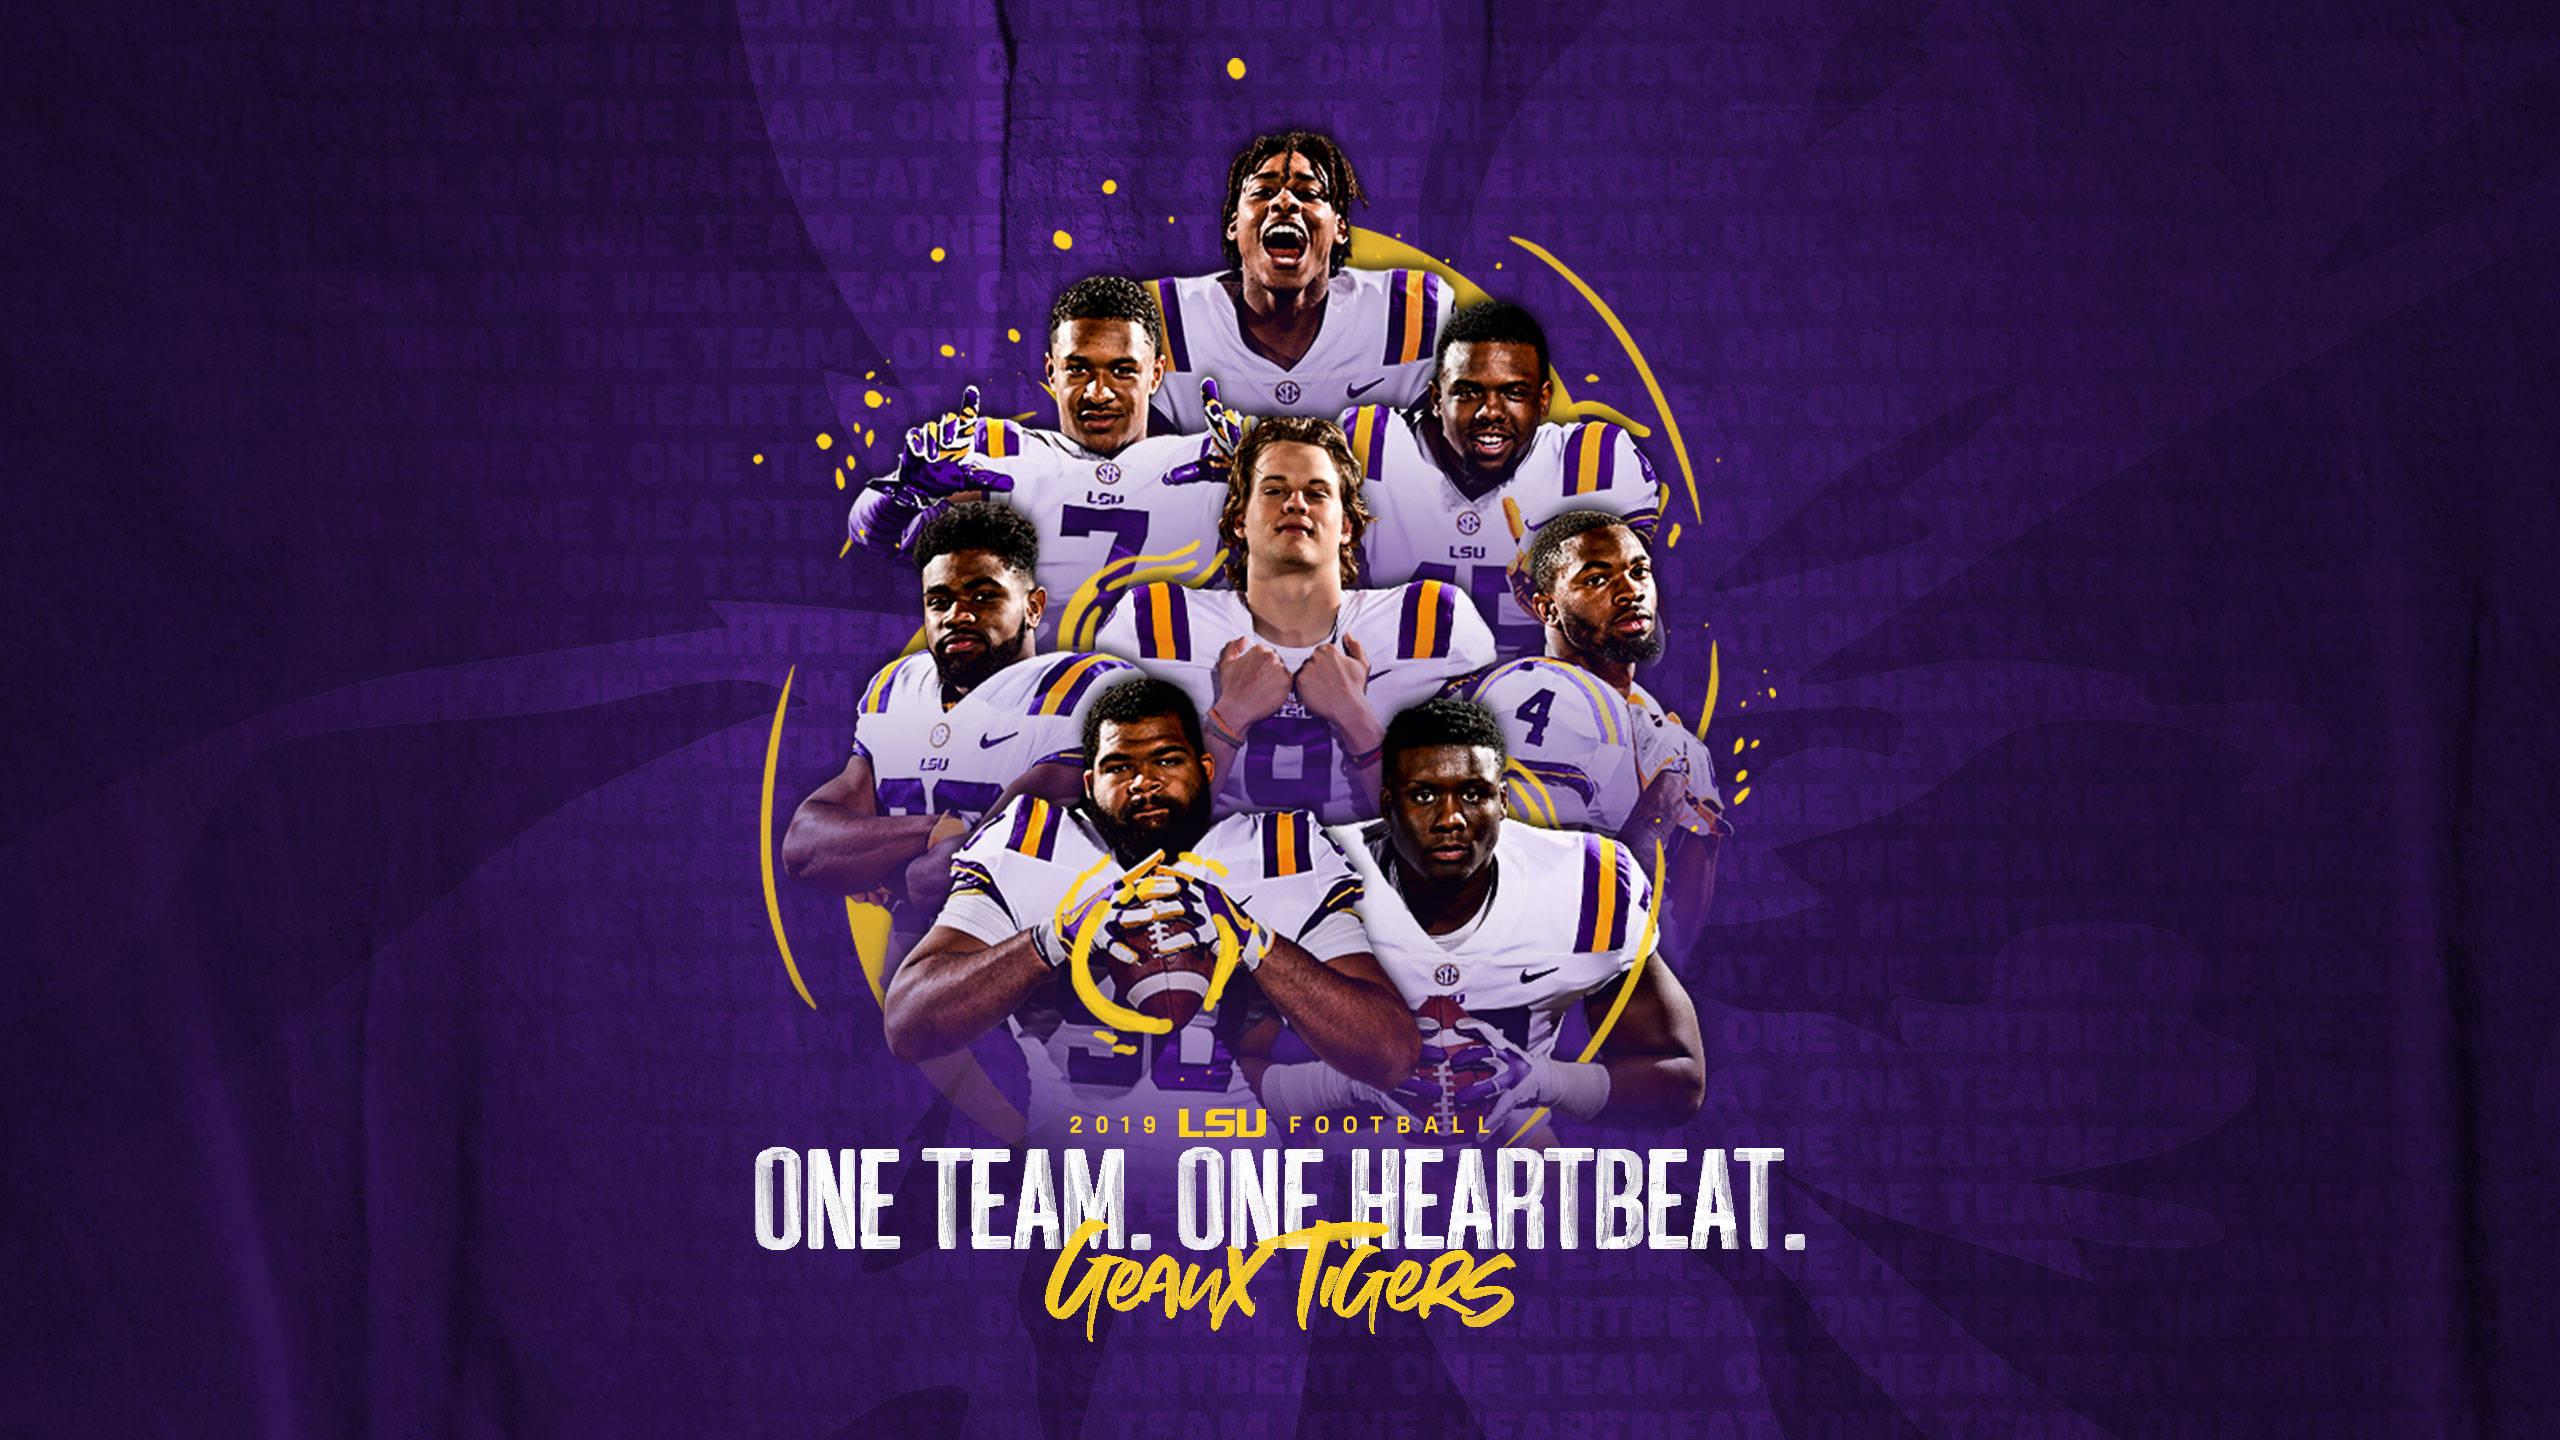 2019 20 LSU Athletics Wallpaper, Covers, Lock Screens.net Official Web Site Of LSU Tigers Athletics